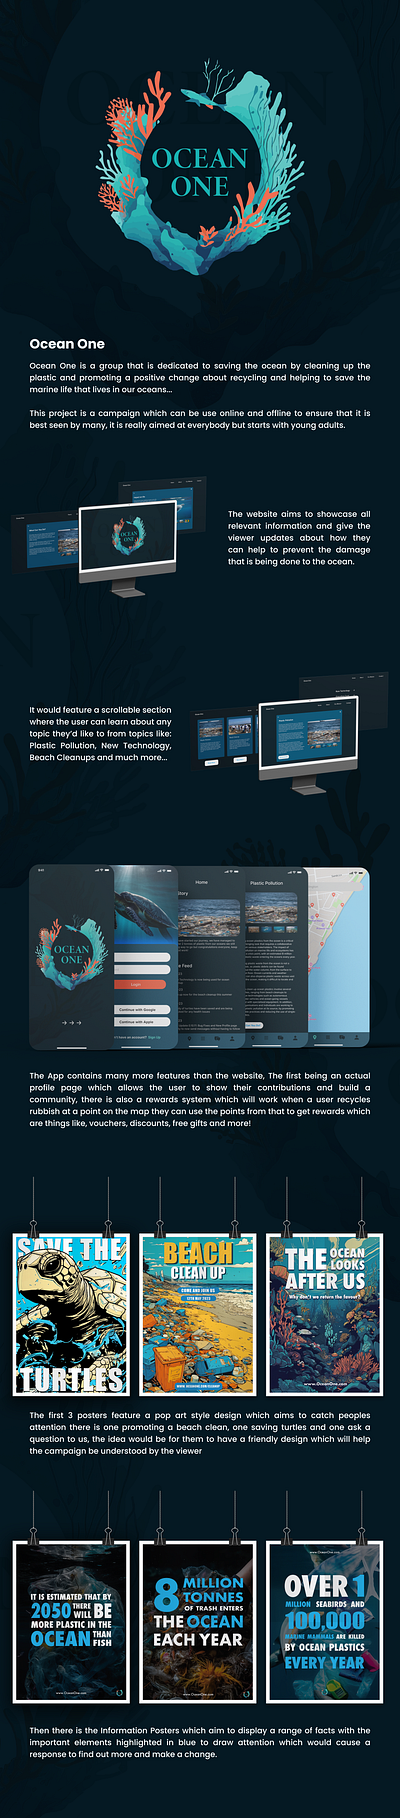 Ocean One - A Campaign to save the ocean app branding design graphic design illustration logo typography ui ux vector